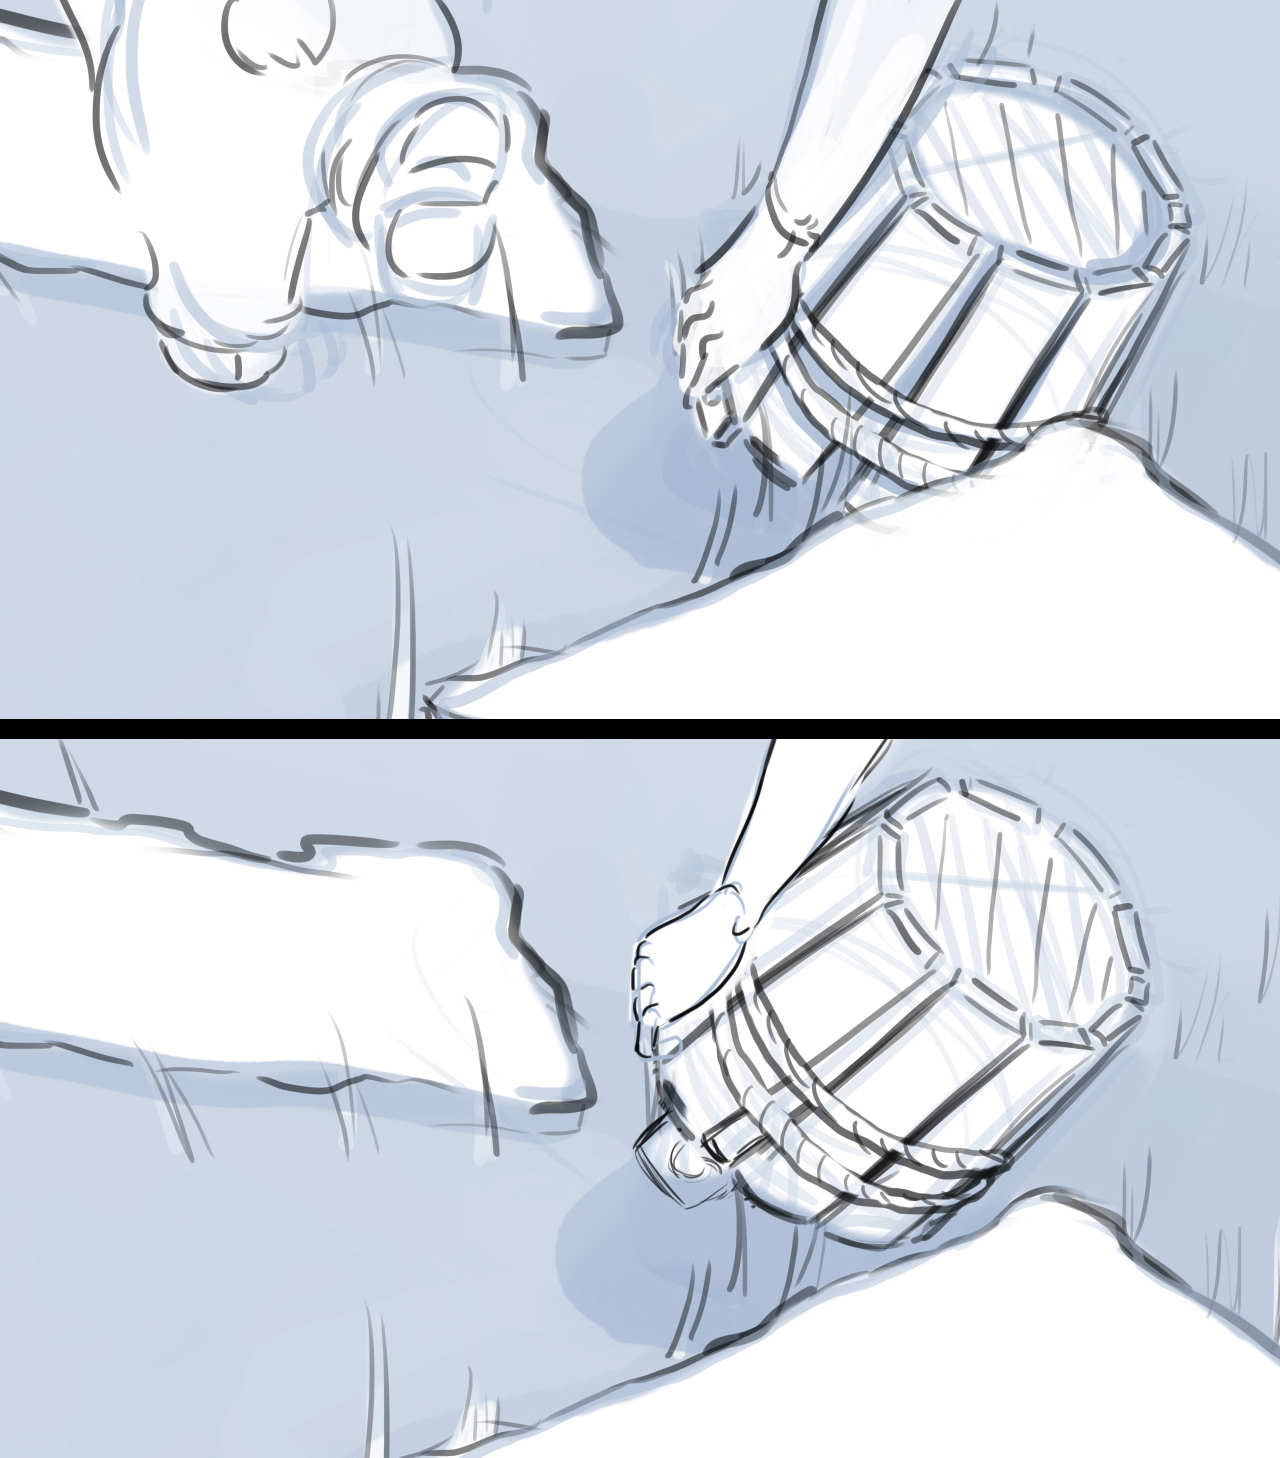 Storyboard sequence from an animated film. Sequence shows the woman's hand lifting the overturned bucket.